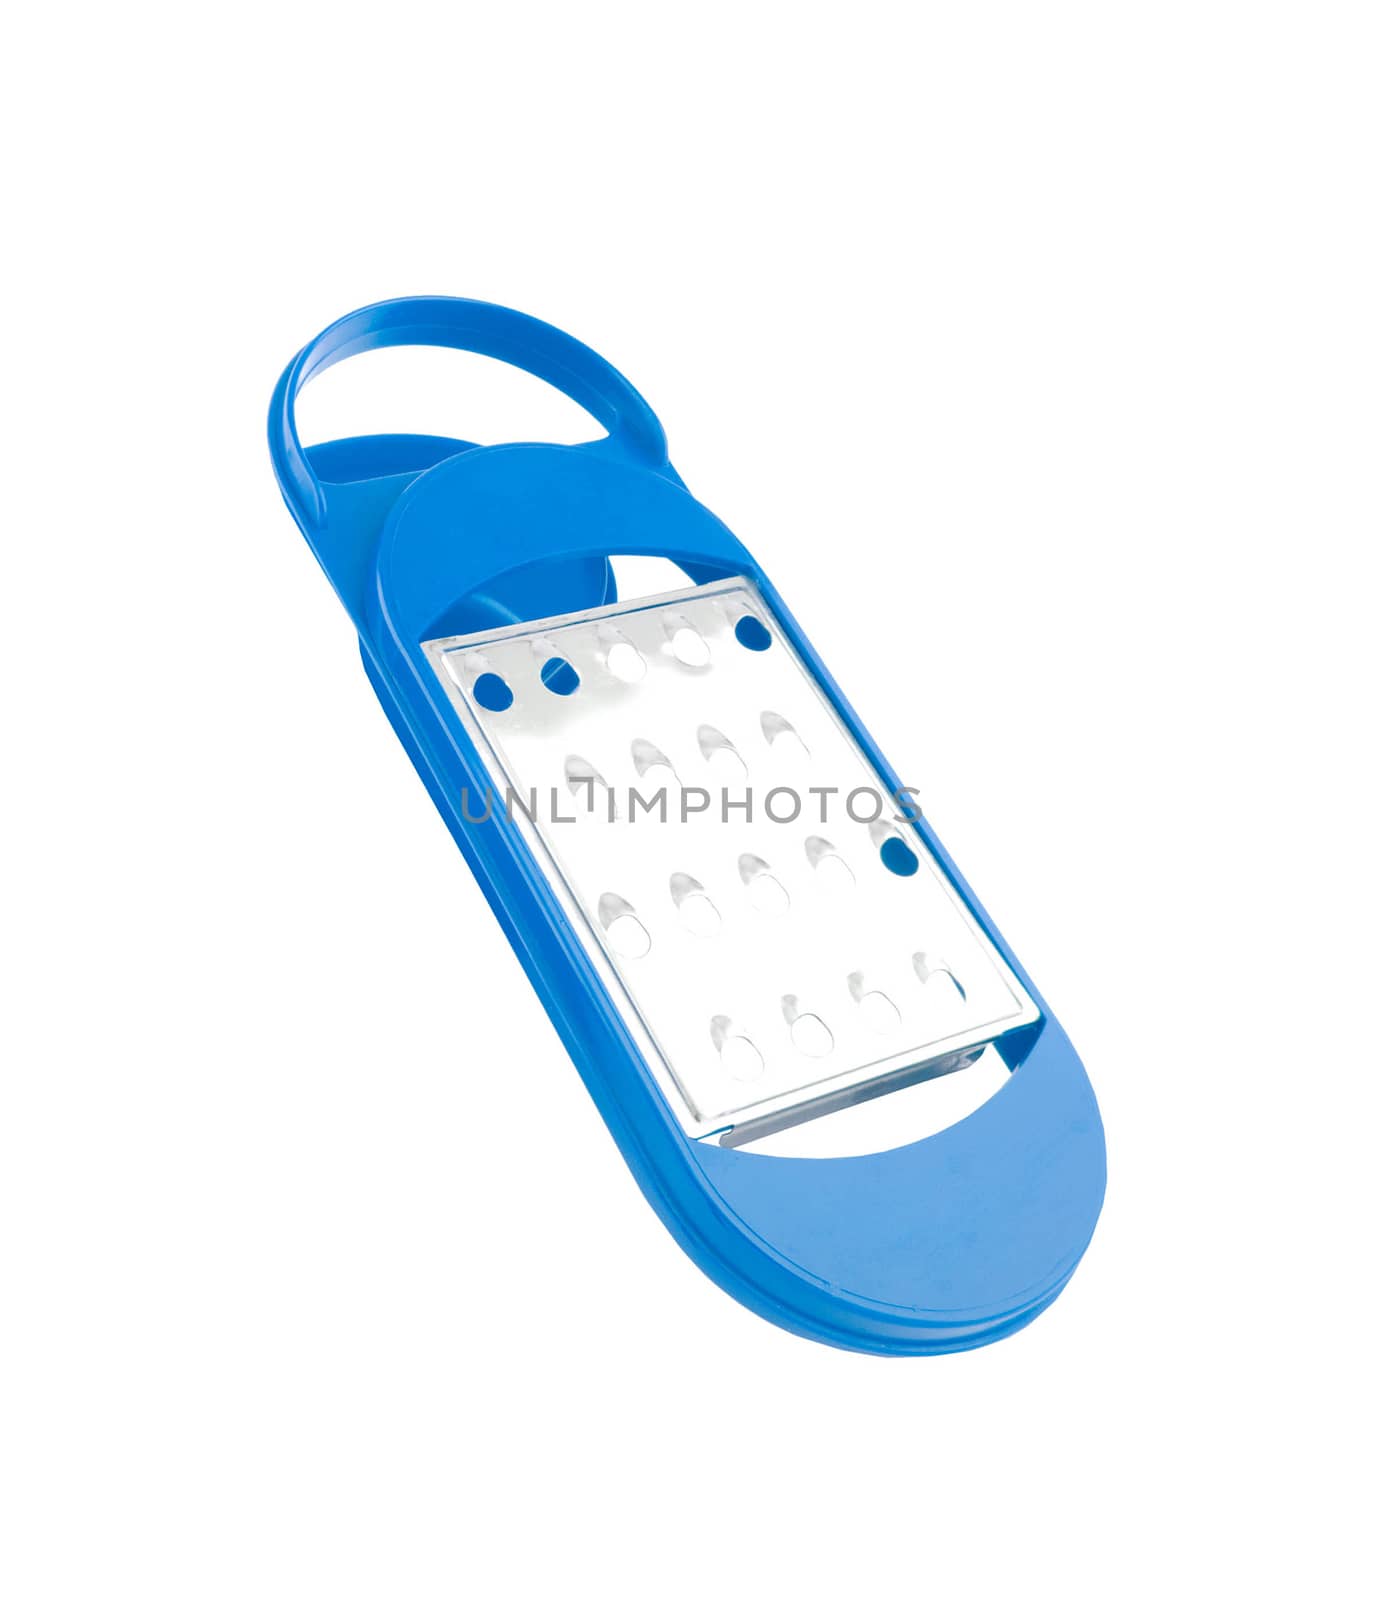 grater with a blue handle